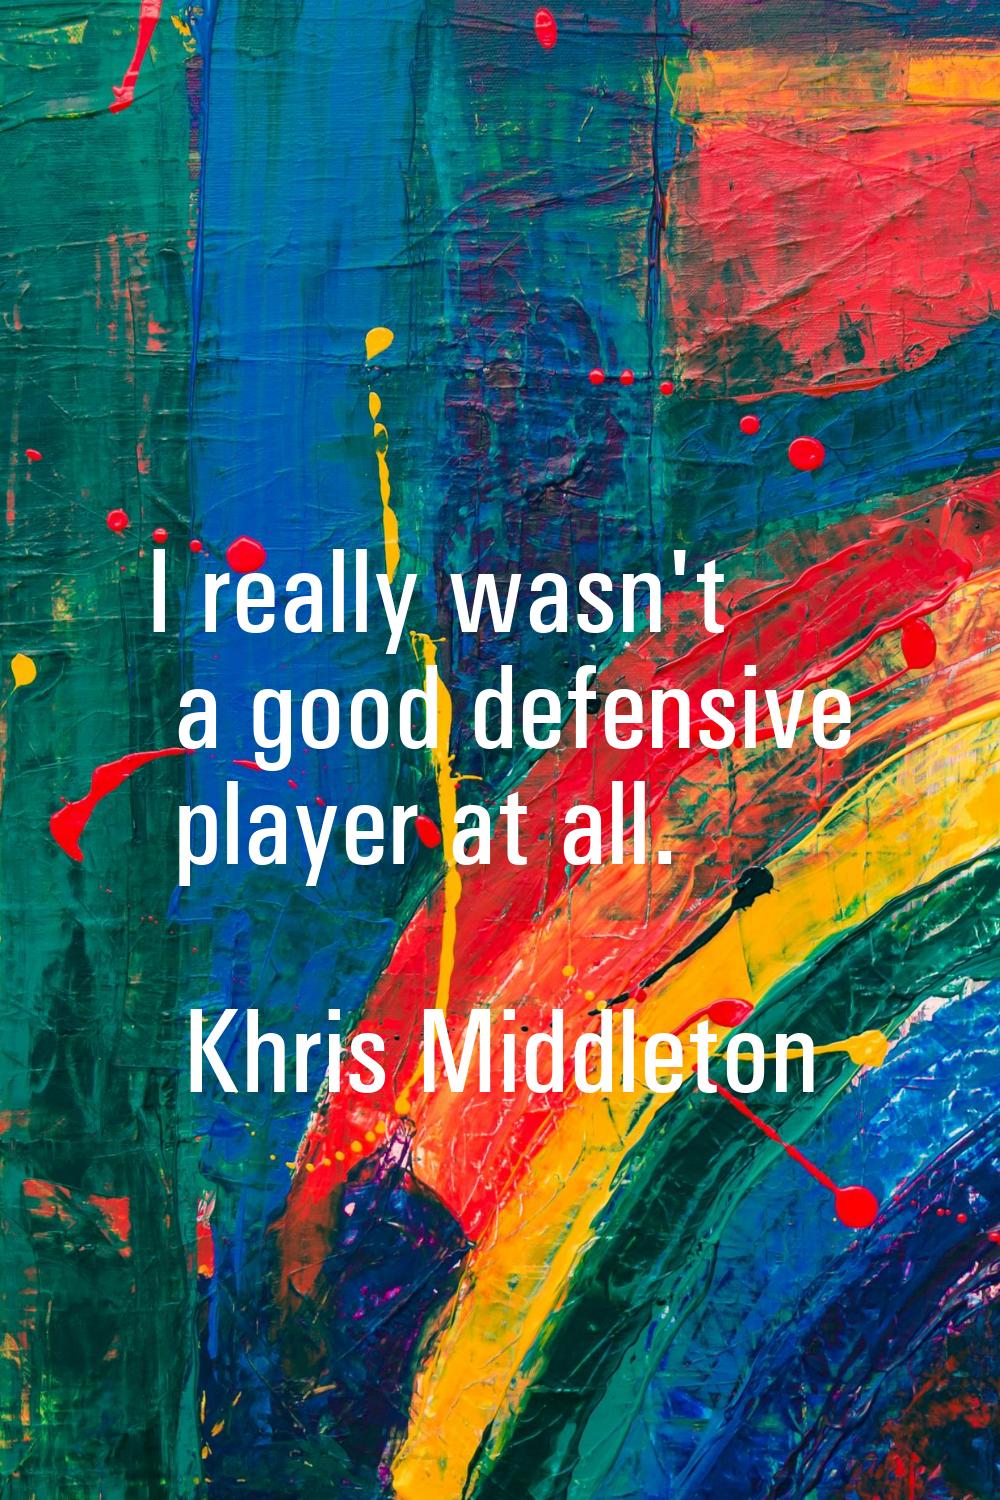 I really wasn't a good defensive player at all.